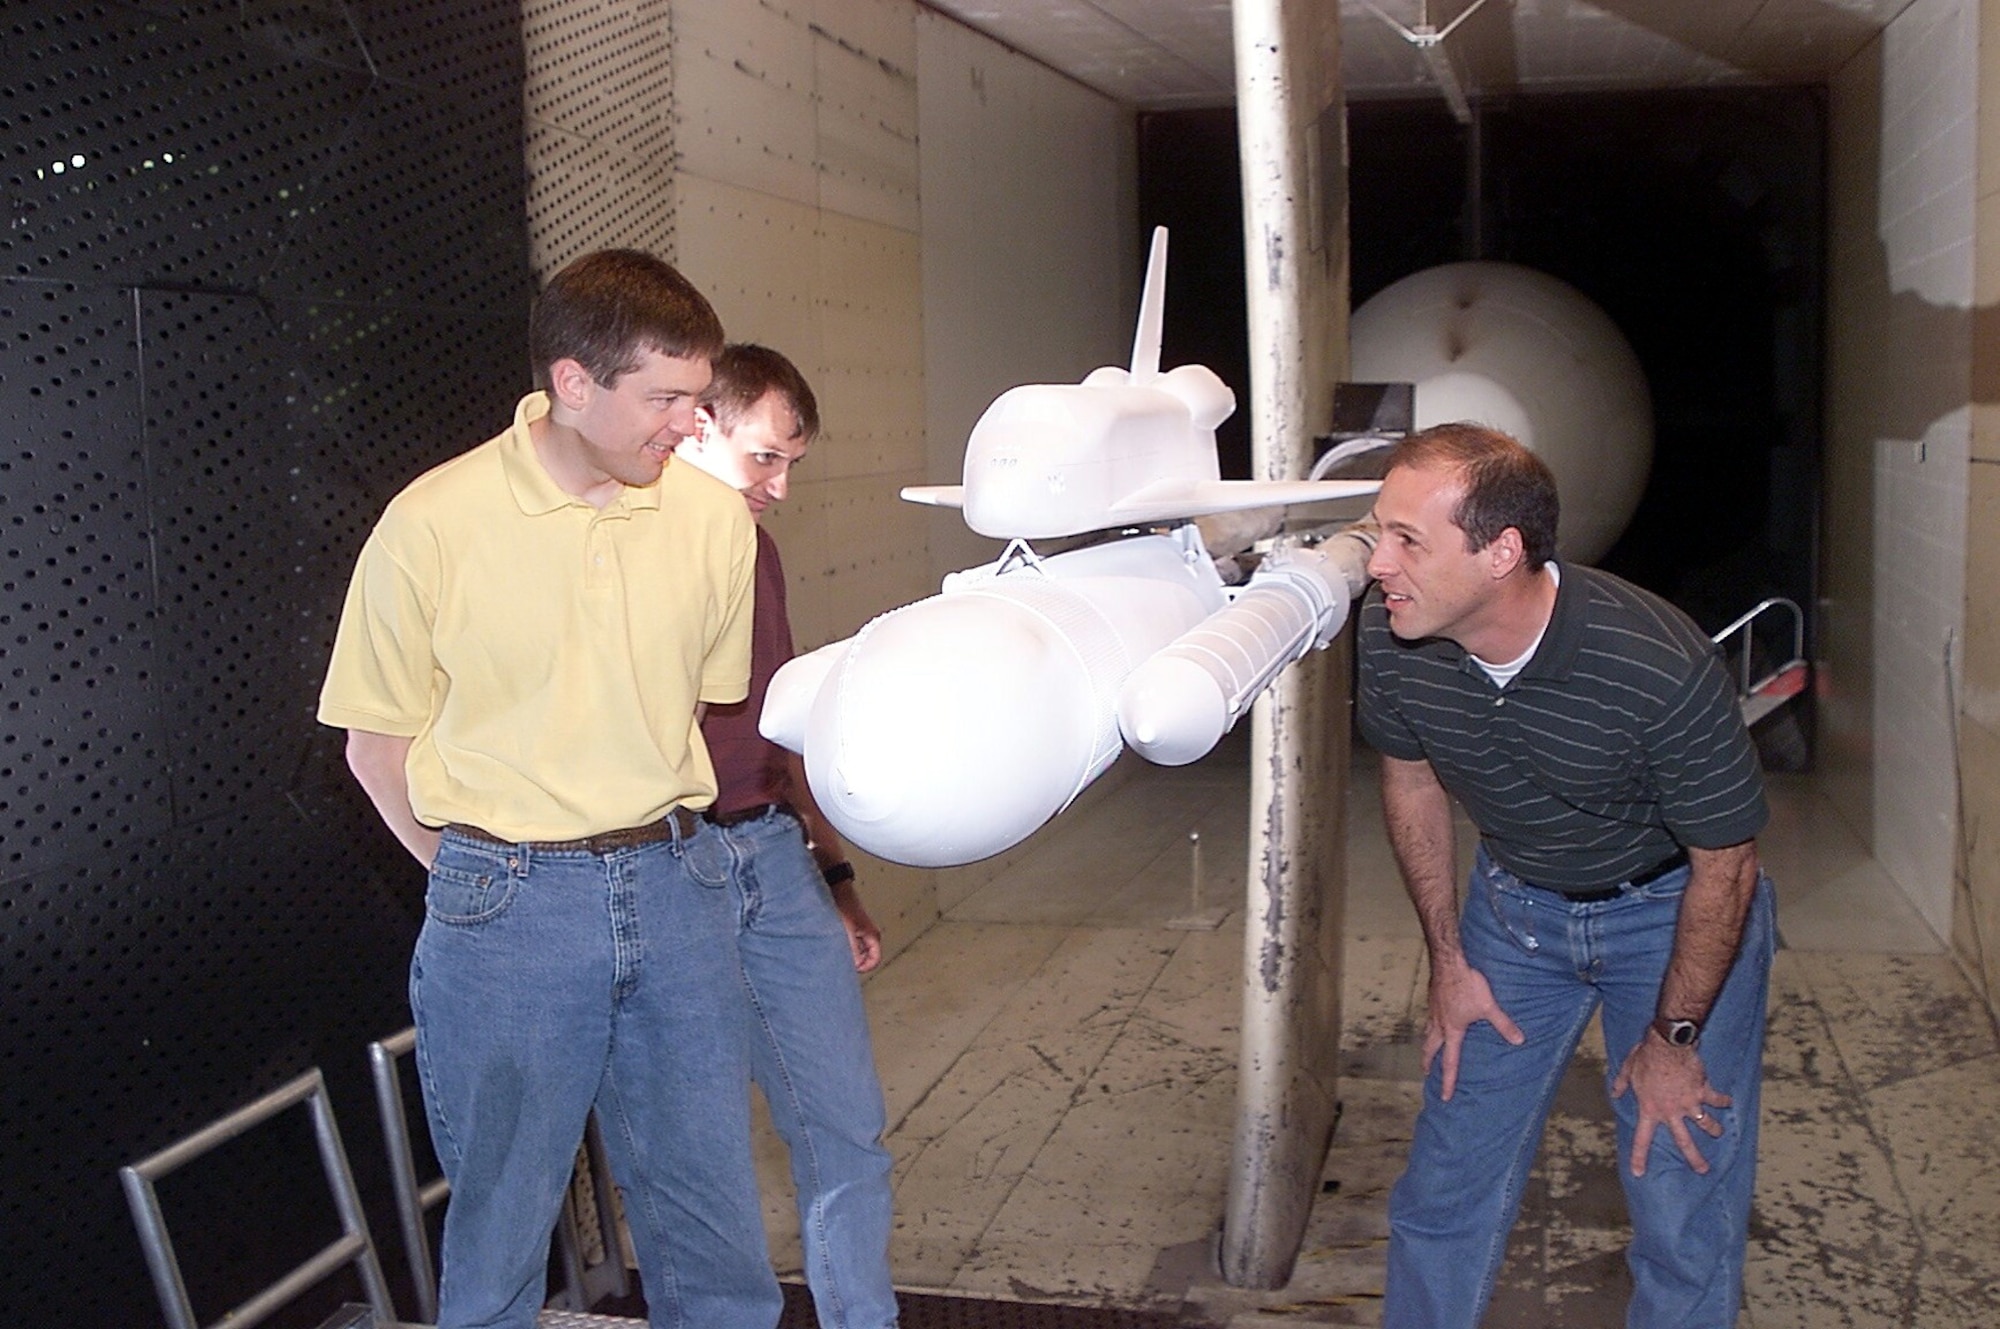 ARNOLD AIR FORCE BASE, Tenn. -- (From left) Jim Greathouse, Darby Vicker and Bob Ess examine a space shuttle model during a model change in the 16-foot transonic wind tunnel at the Arnold Engineering Development Center here.  Mr. Greathouse and Mr. Vicker are computational fluid dynamics analysts, and Mr. Ess is a program manager.  They are from NASA's Johnson Space Center in Houston.  (U.S. Air Force photo)